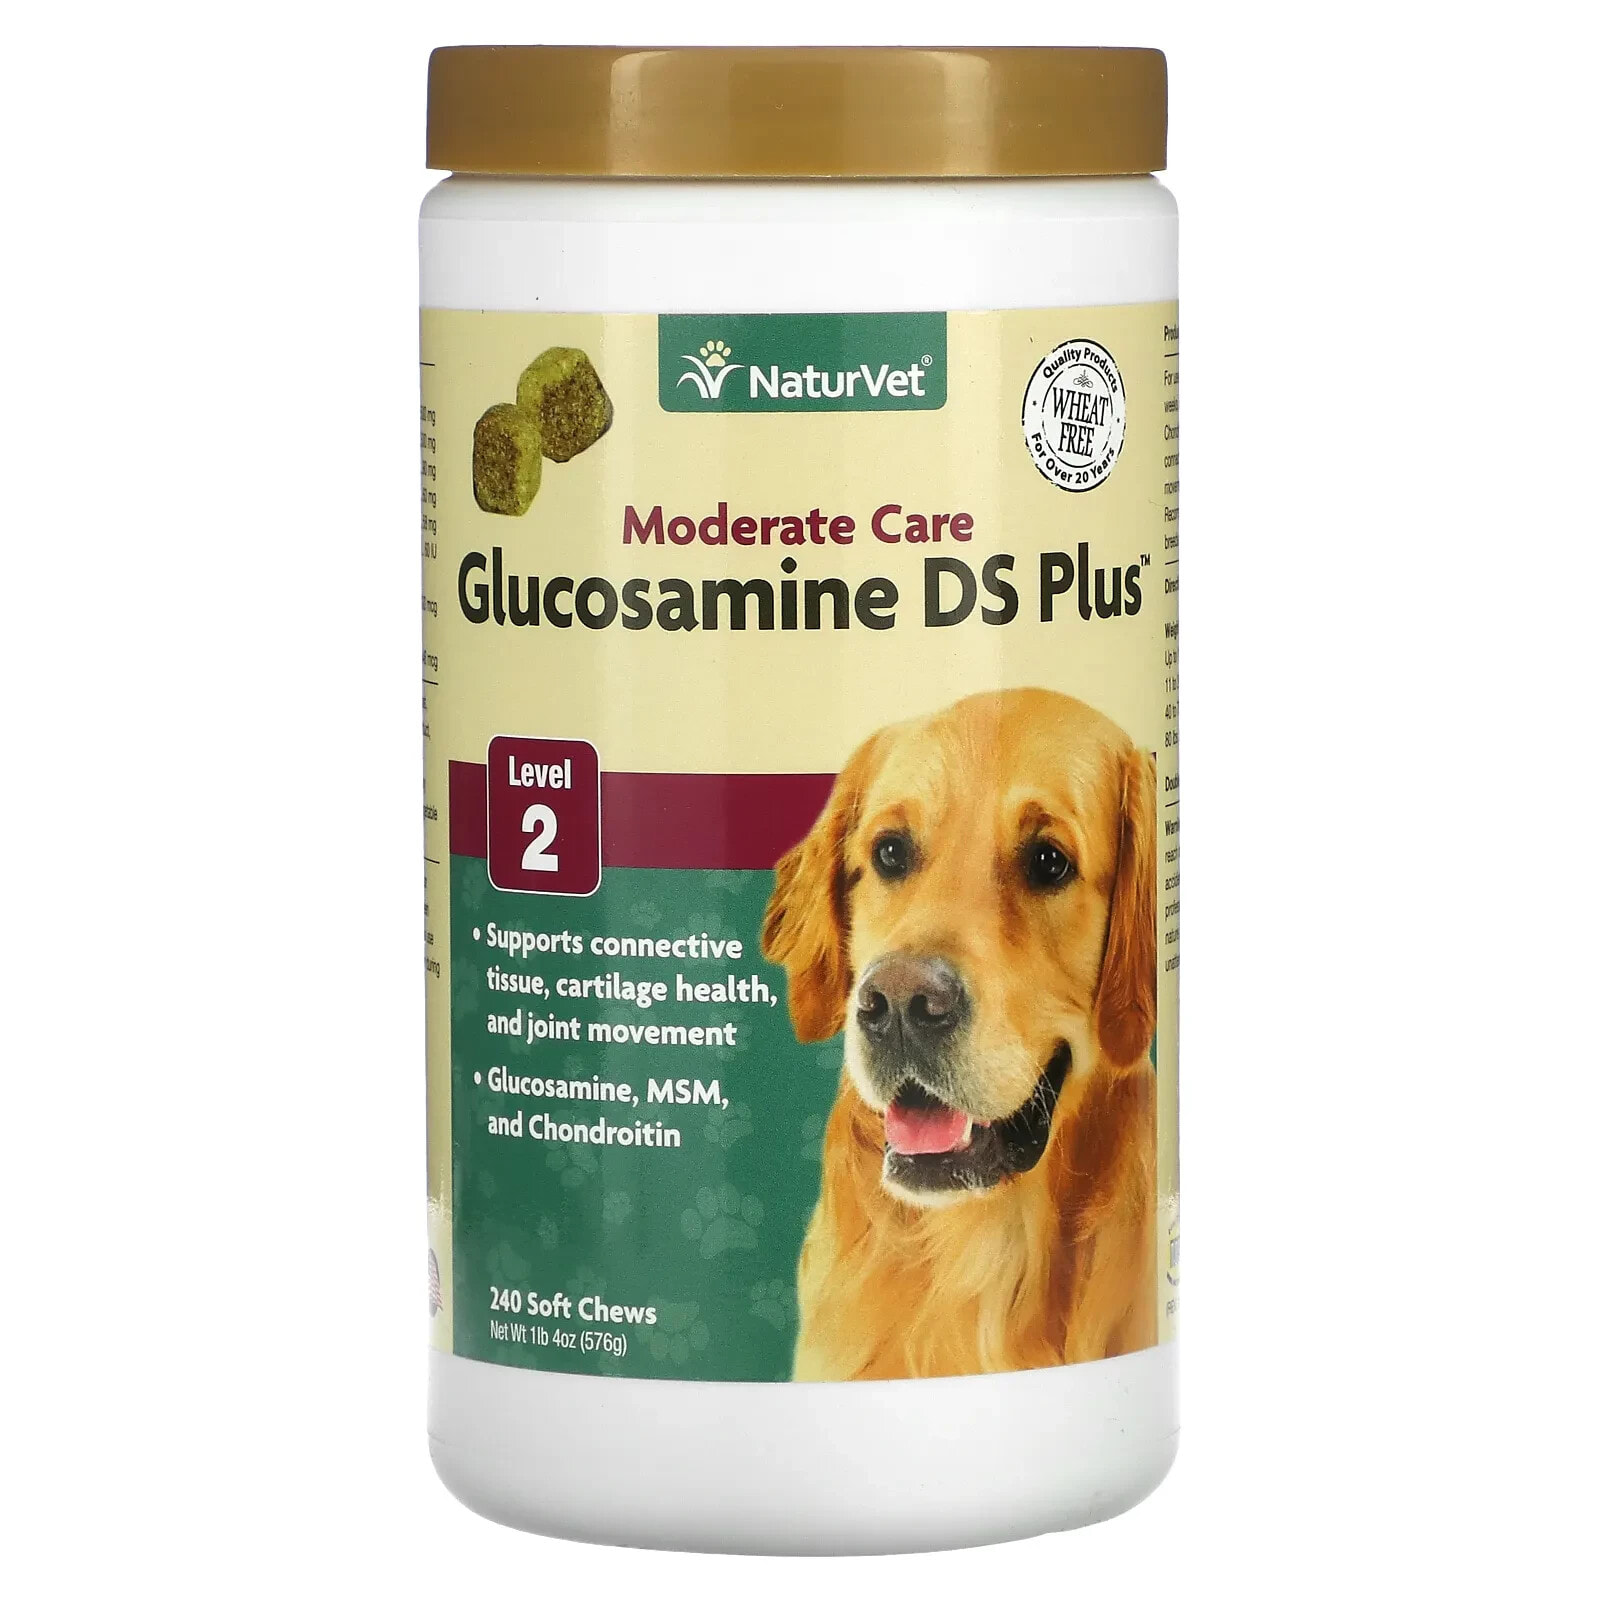 NaturVet, Glucosamine DS Plus, Moderate Joint Care, Level 2, 120 Soft Chews, 10.1 oz (288 g)